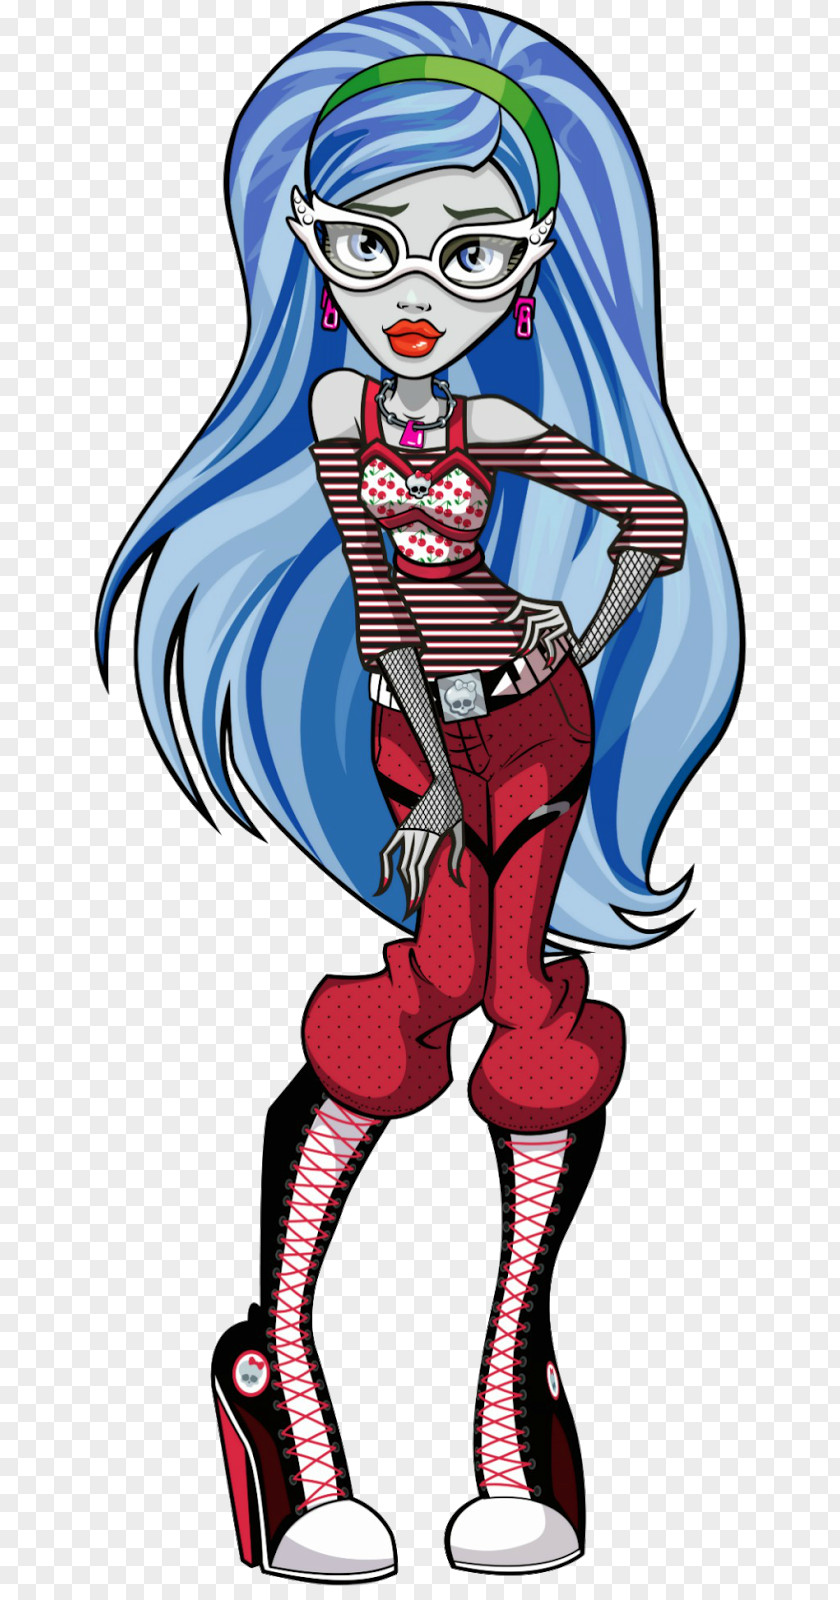 Ghoul Monster High Ghoulia Yelps Doll PNG